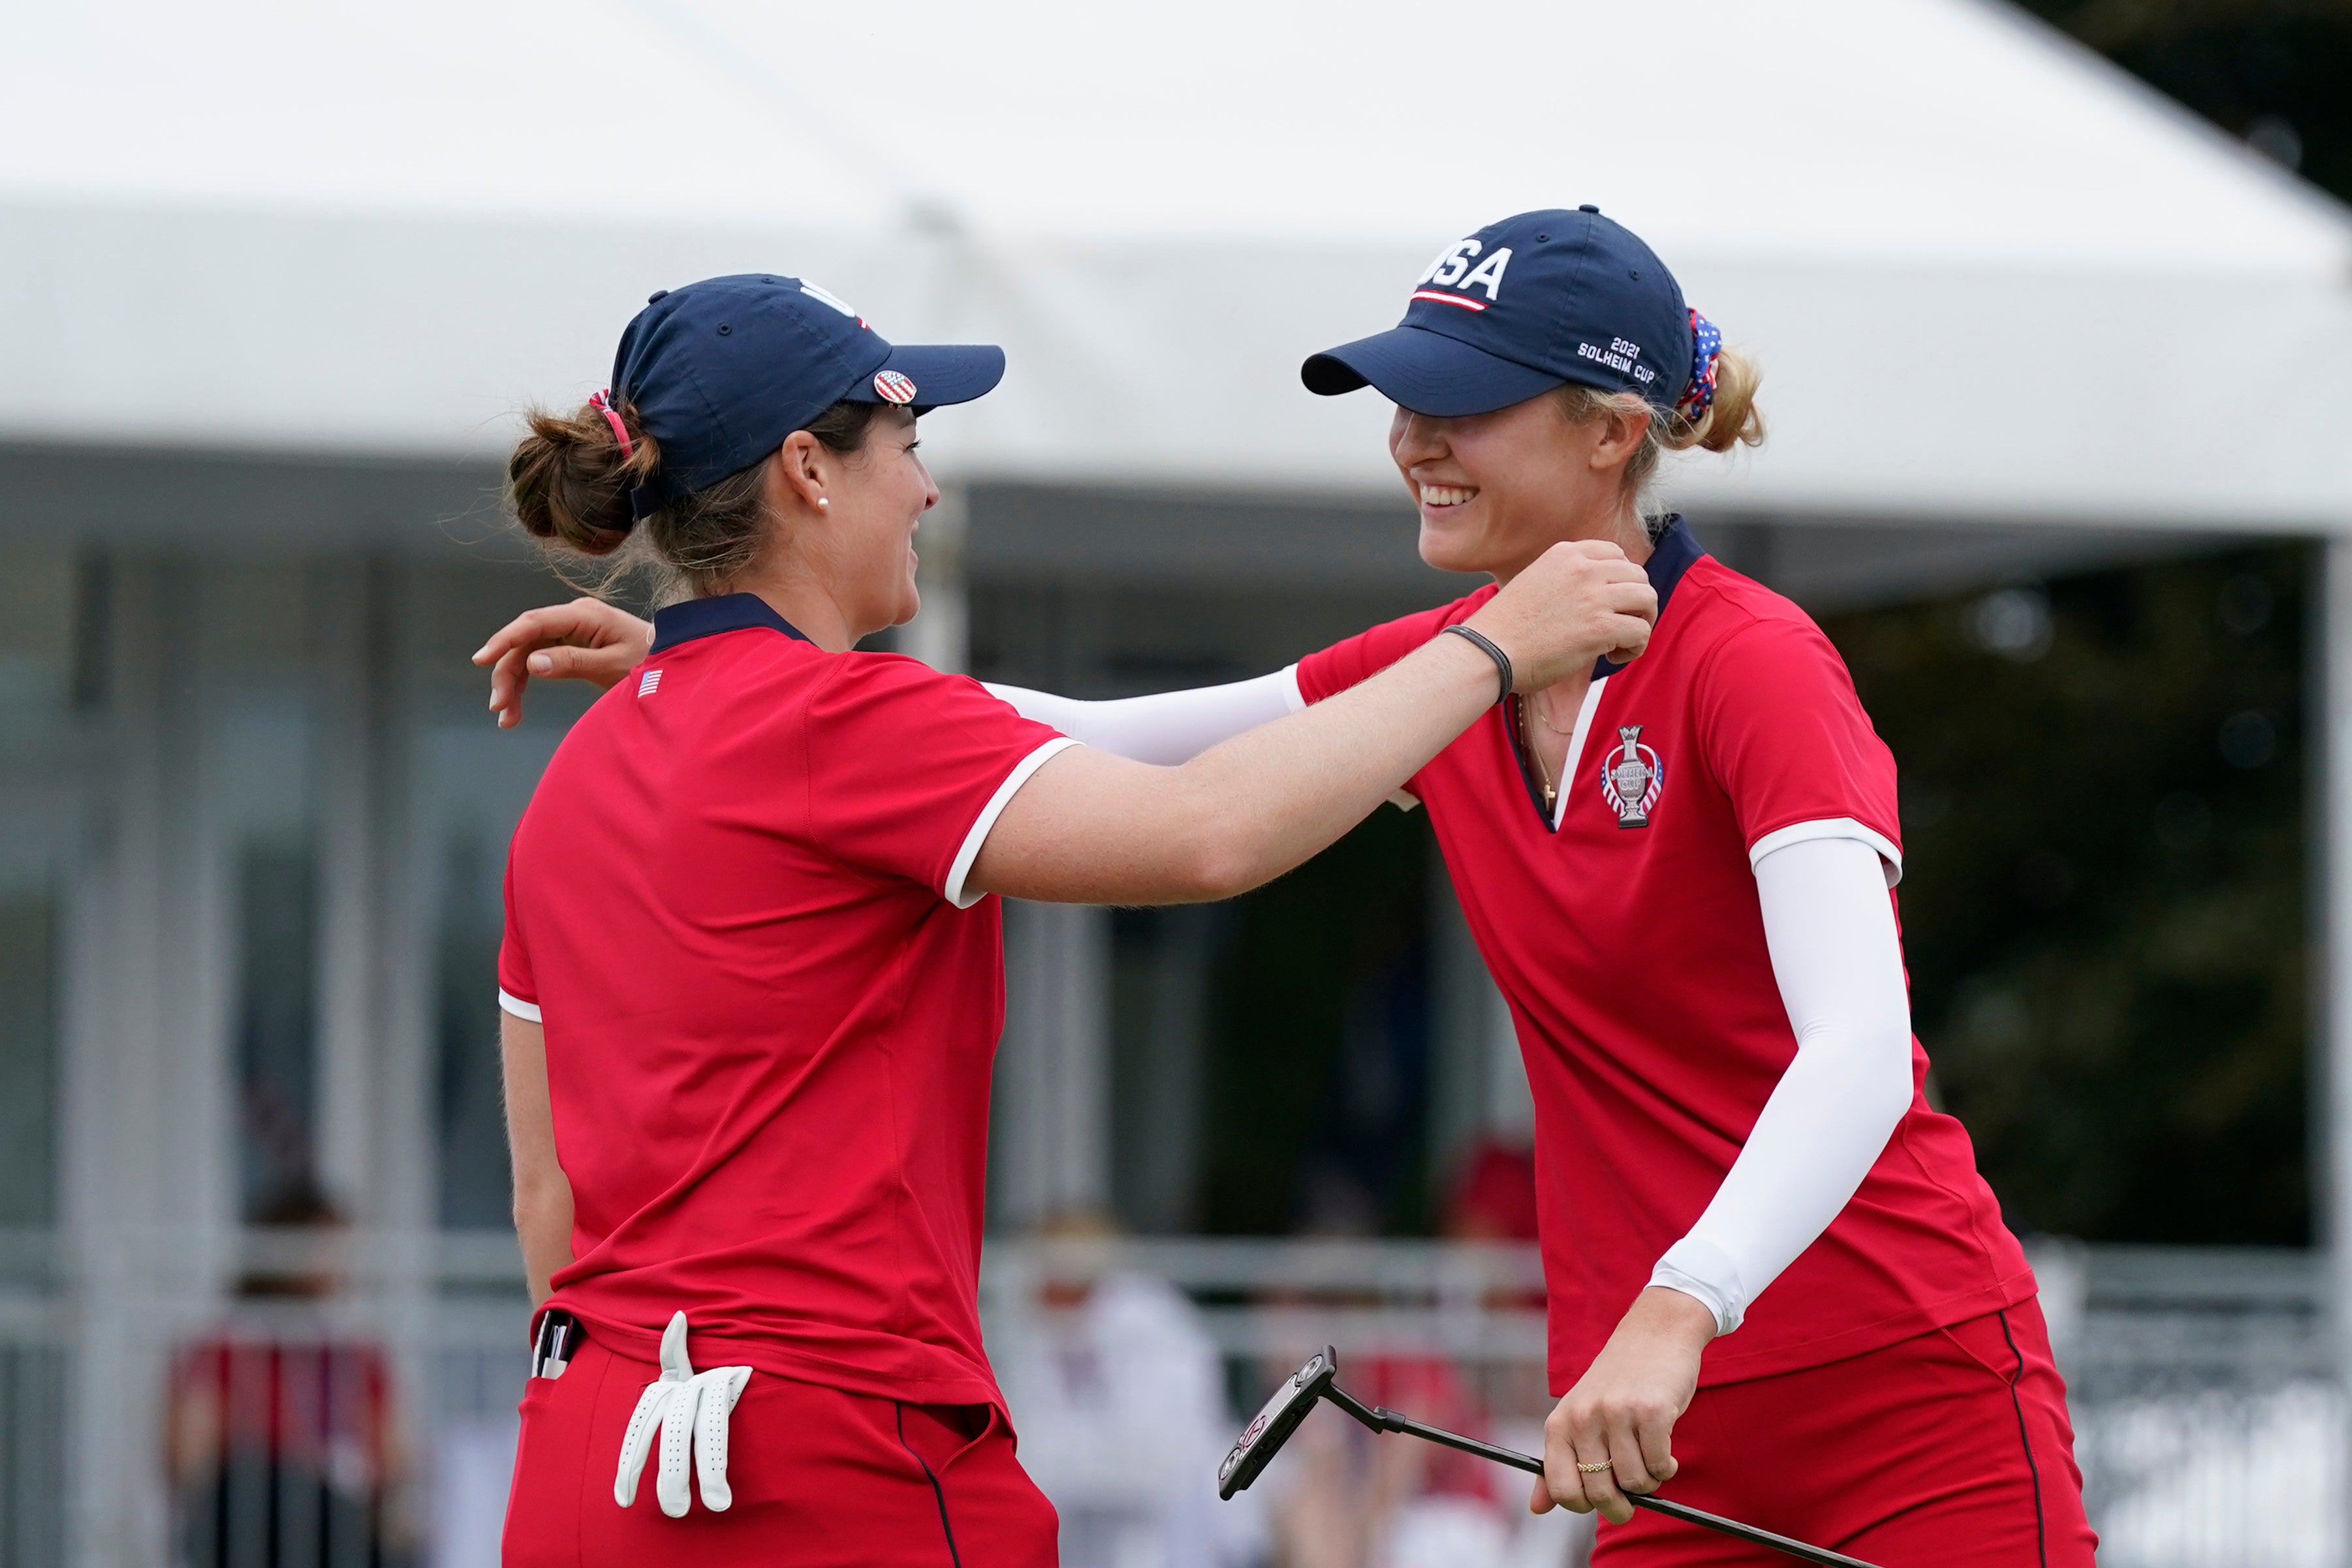 Ally Ewing, left, and Nelly Korda celebrate their win on the 18th green (Carlos Osorio/AP)